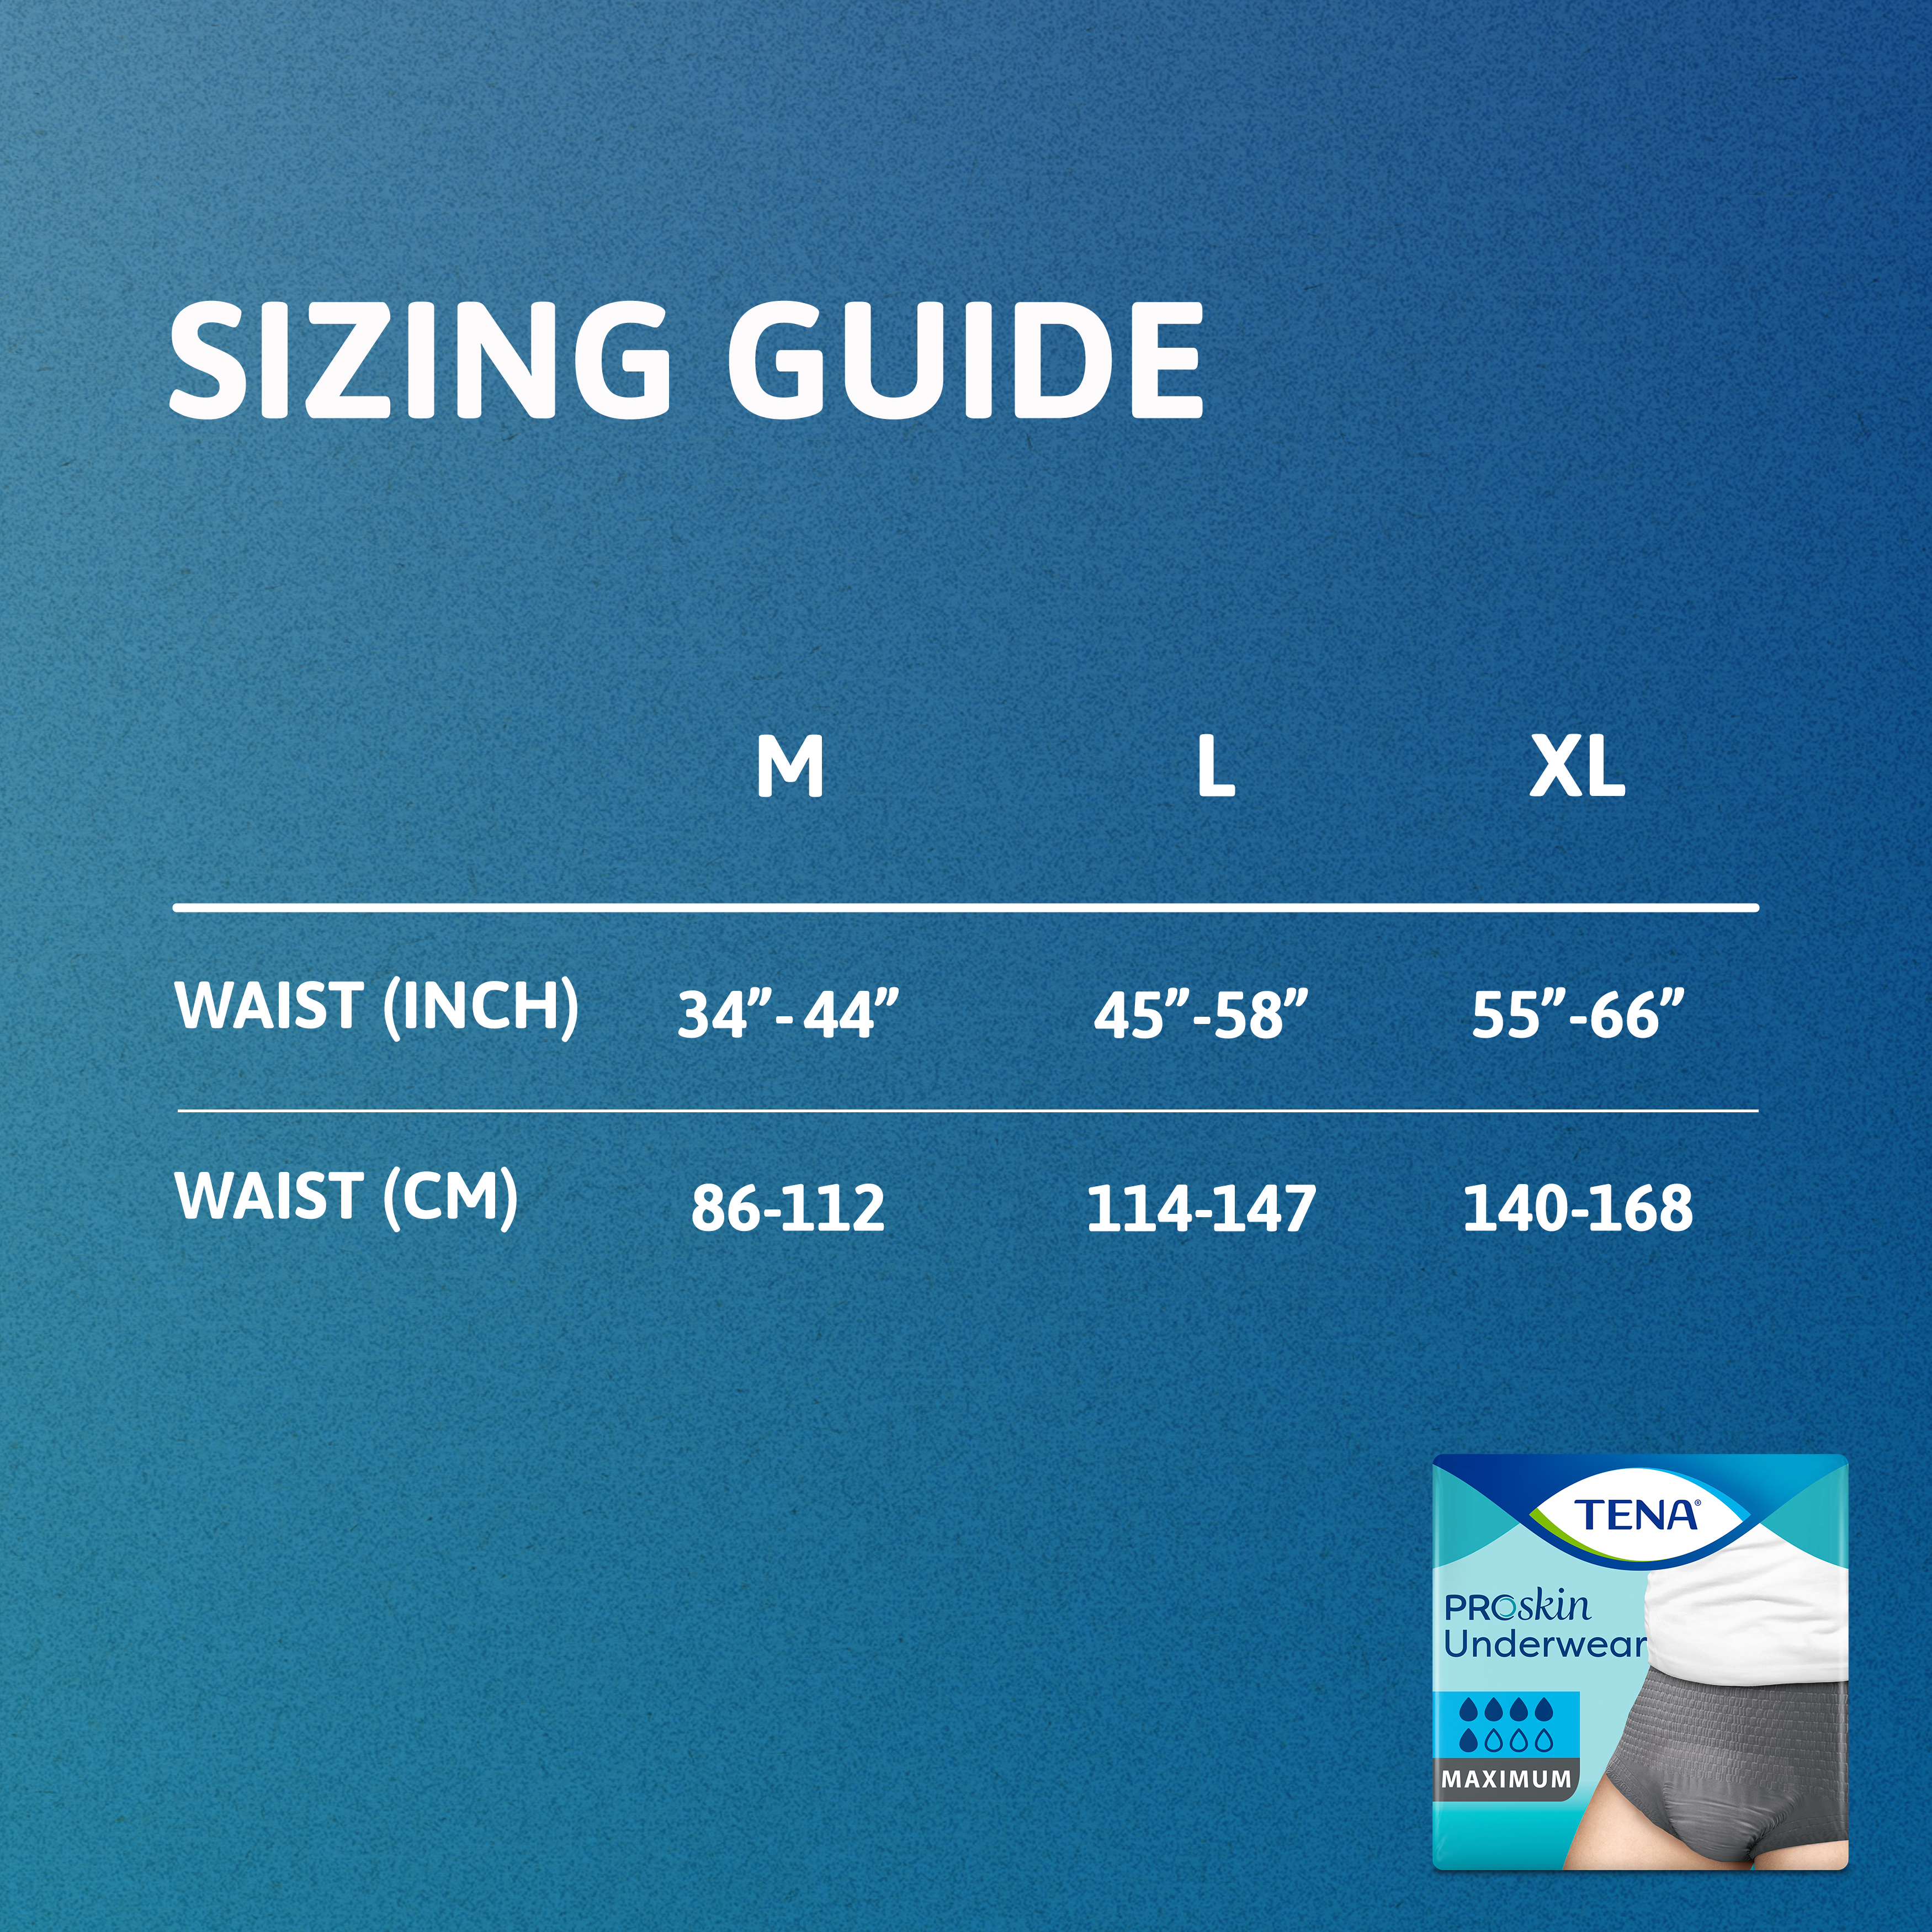 Sizing guide: medium 34 inches to 44 inches, large  45 inches to 58 inches, extra large 55 inches to 66 inches